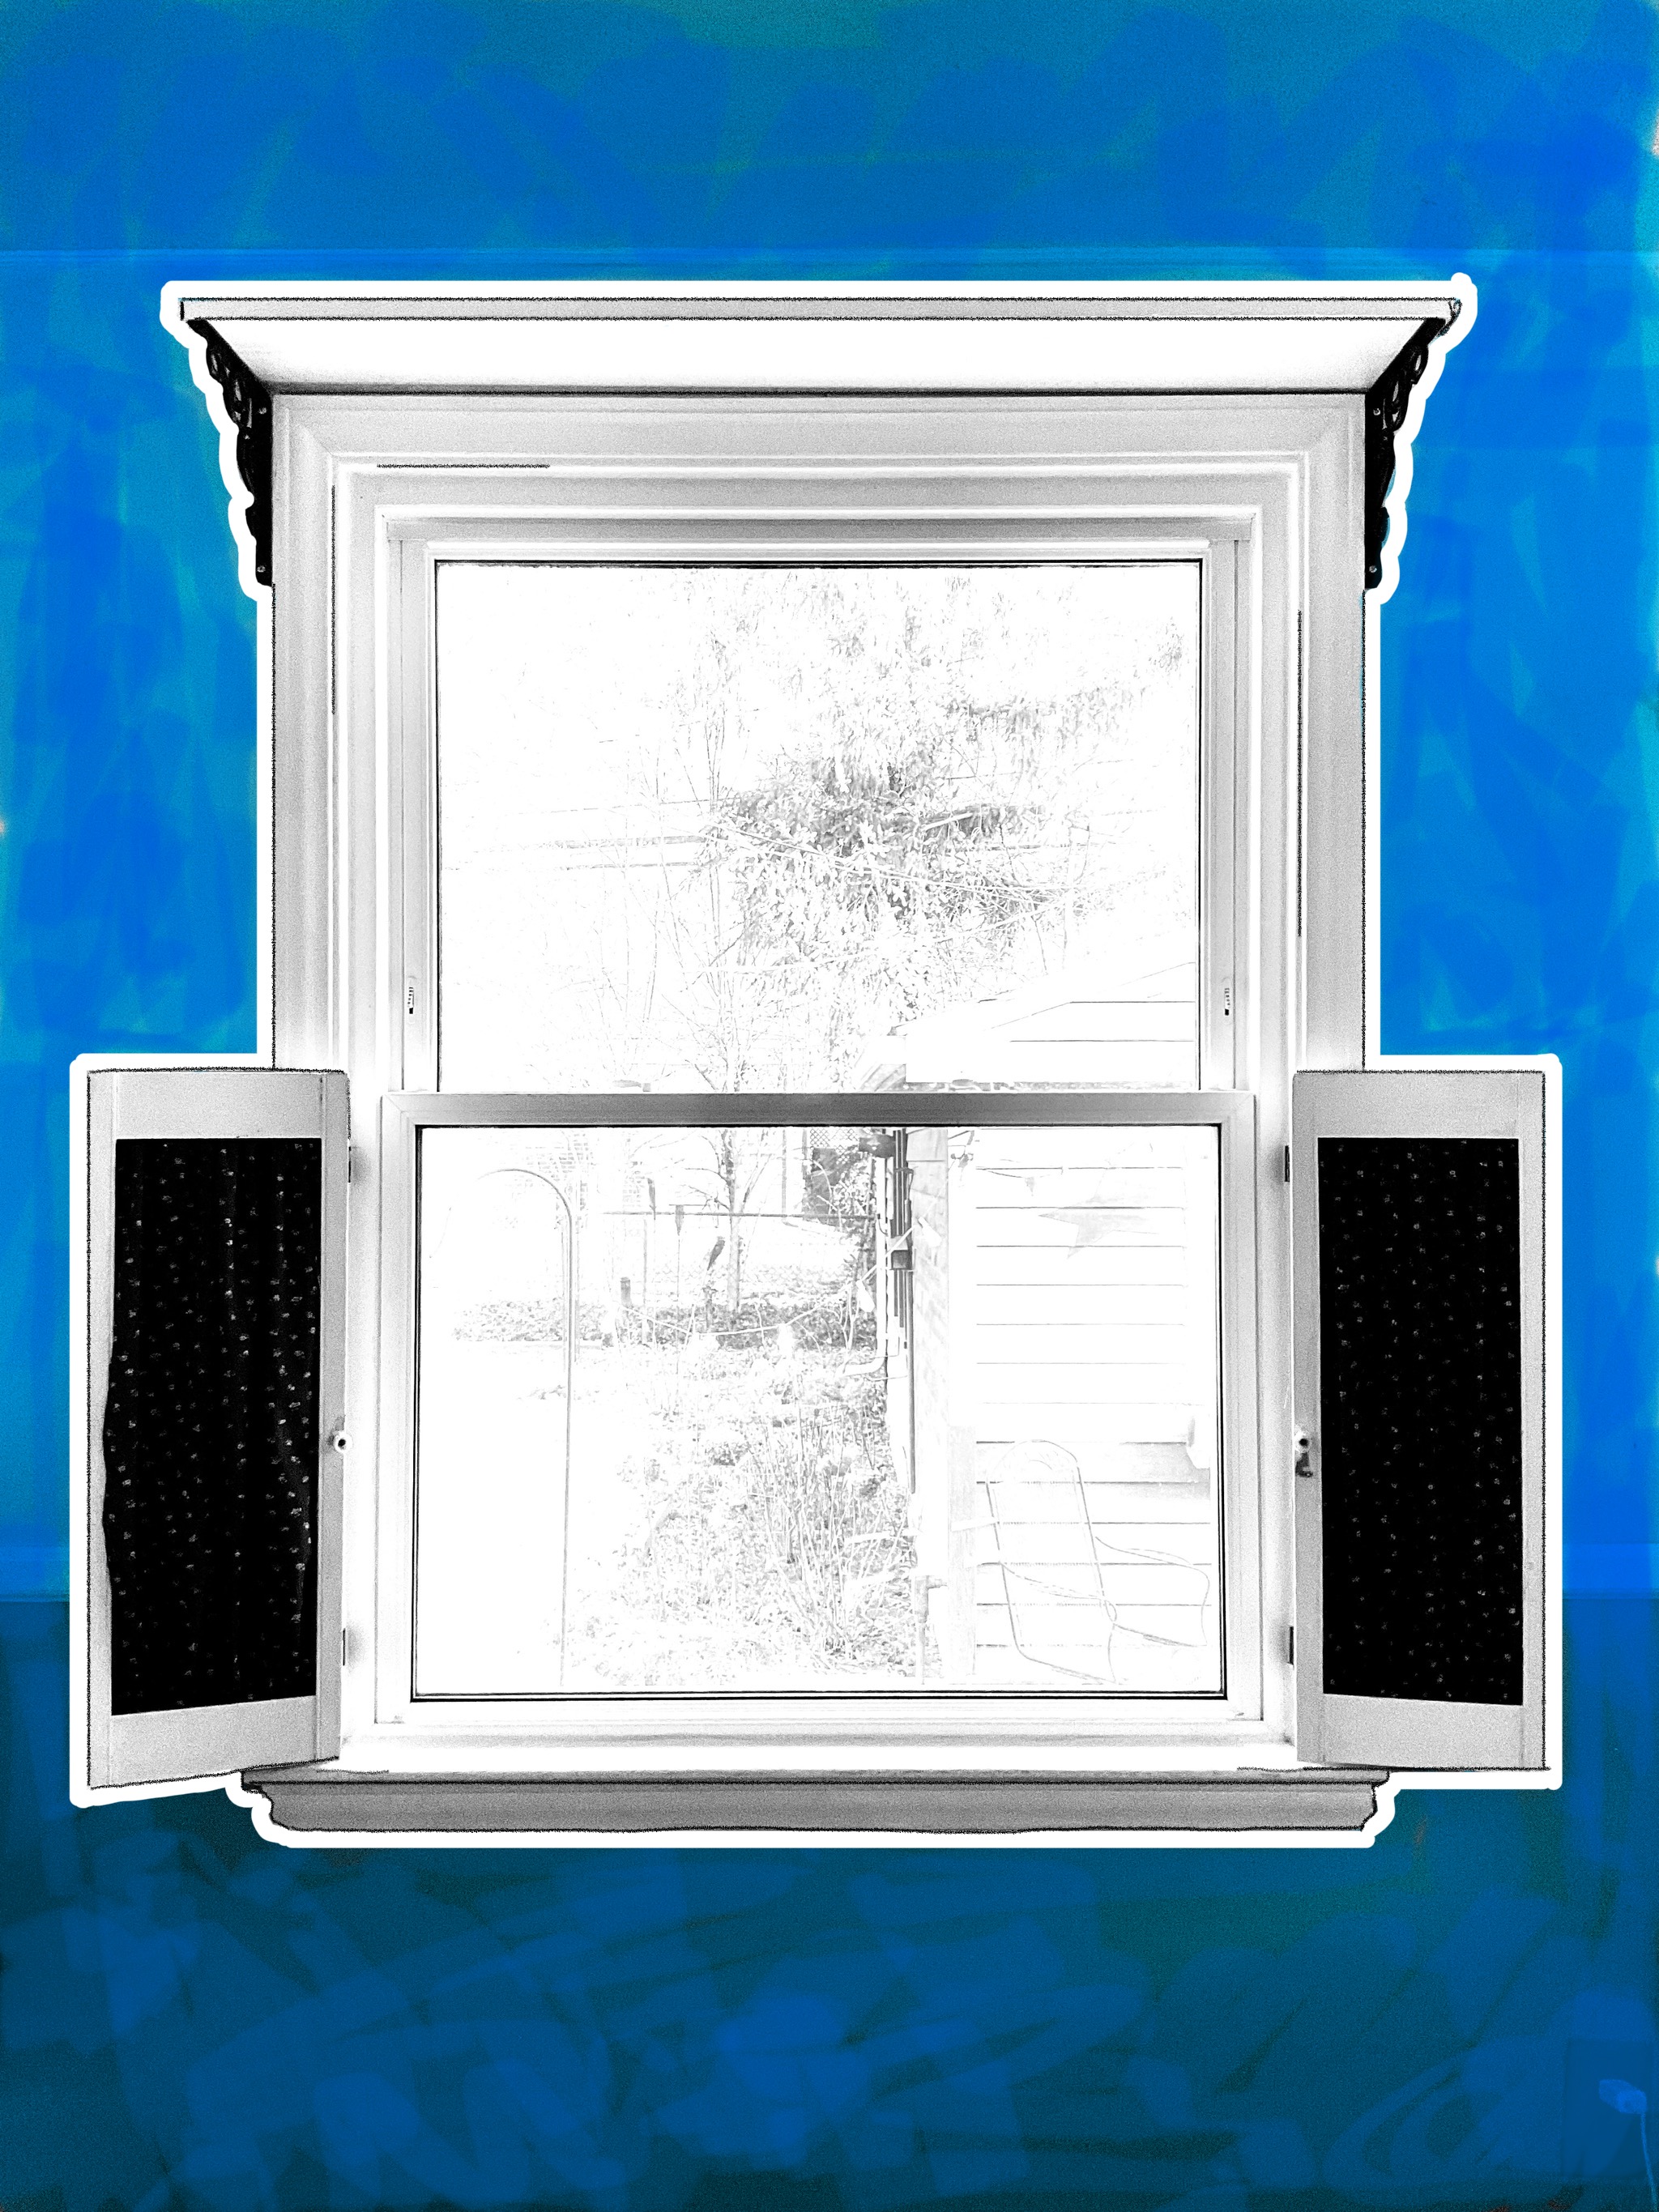 A black and white photo of a window, with a blue colored background